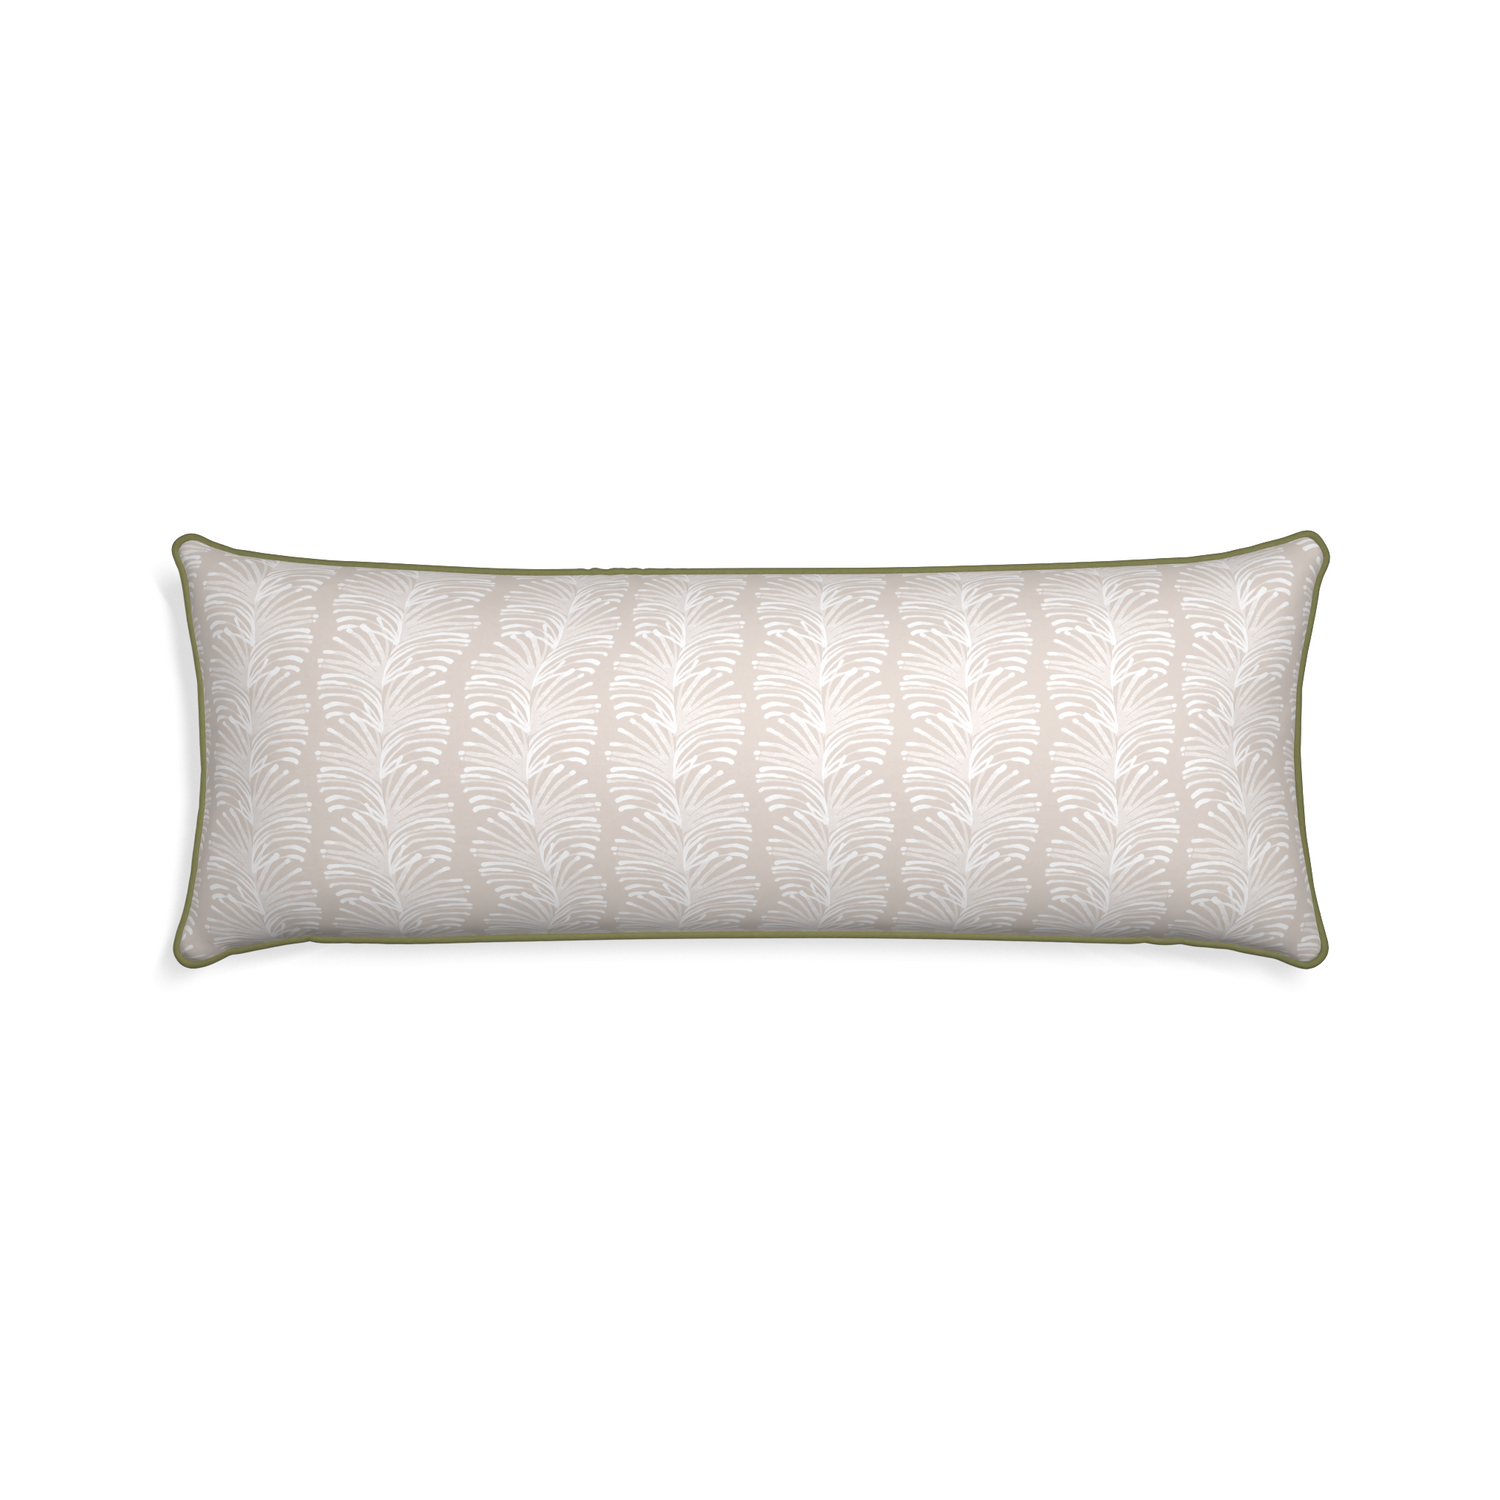 rectangle sand colored botanical stripe pillow with moss green piping